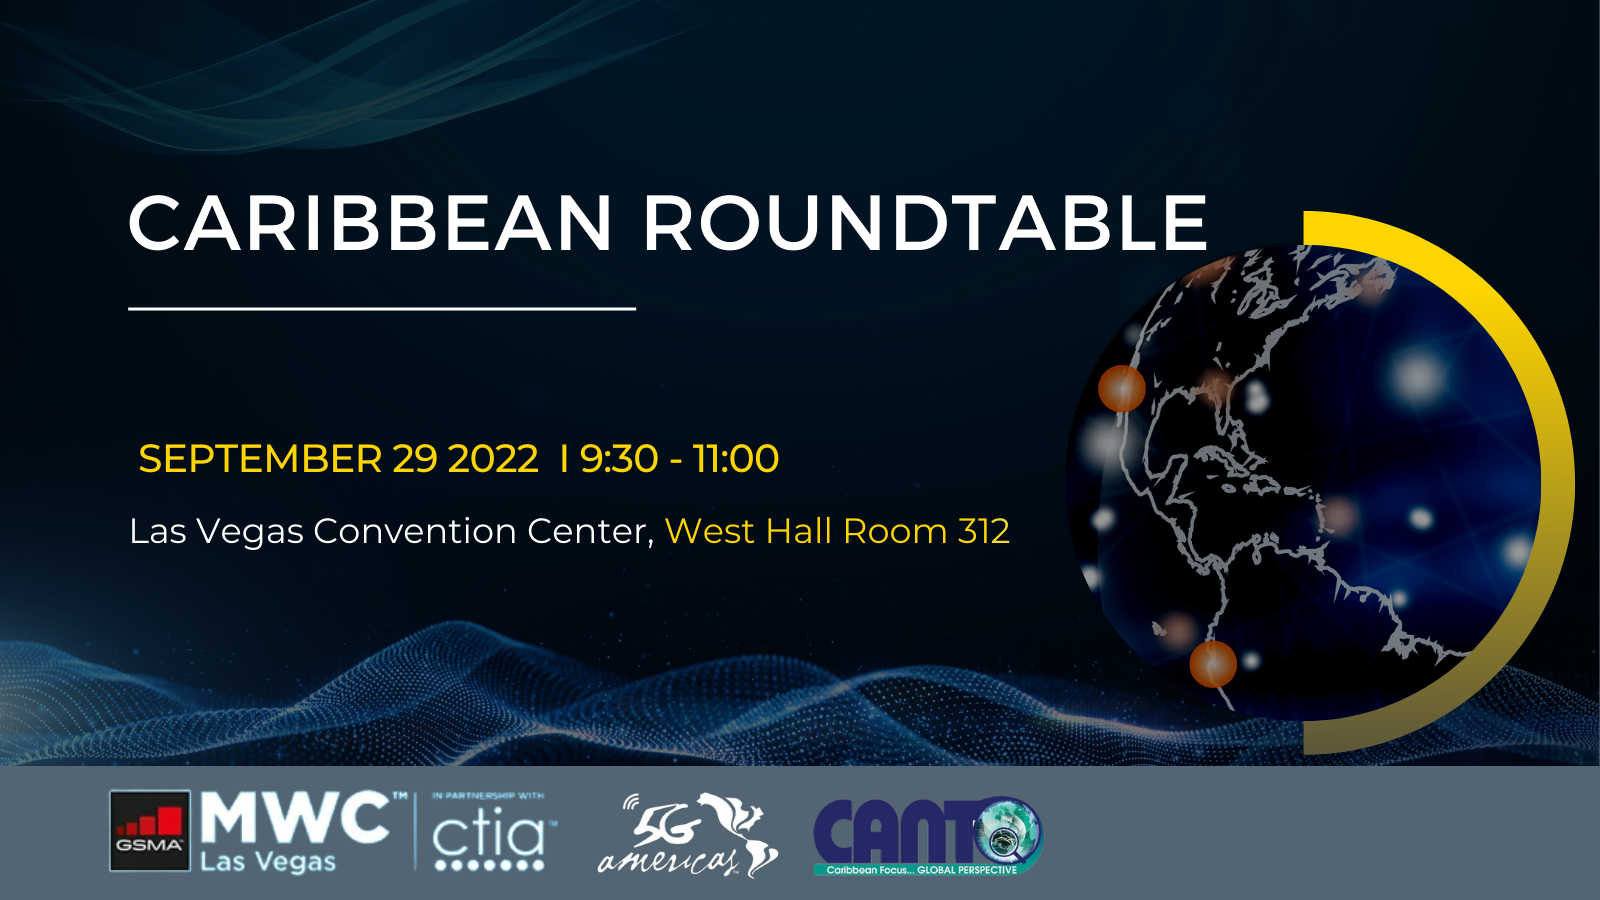 Caribbean Roundtable